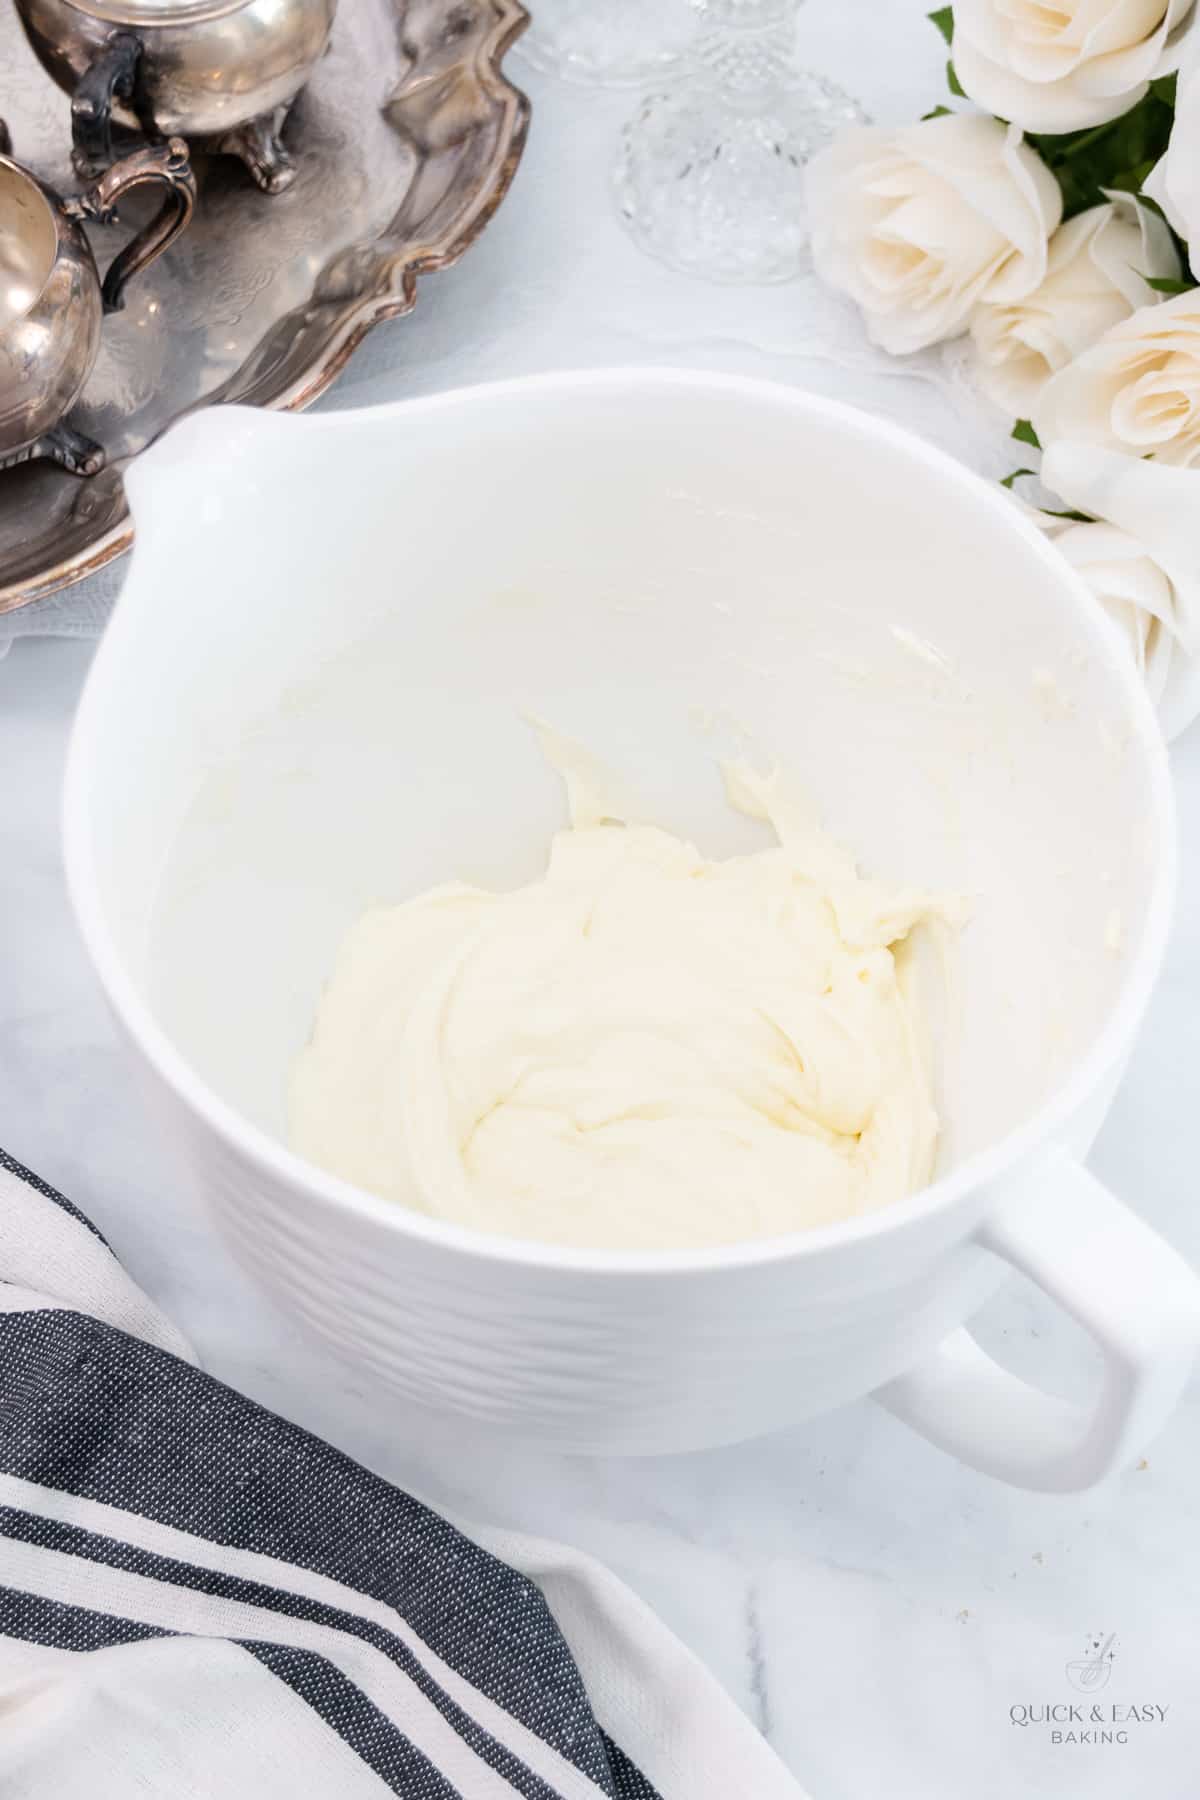 Mixed cream cheese in a white mixing bowl.